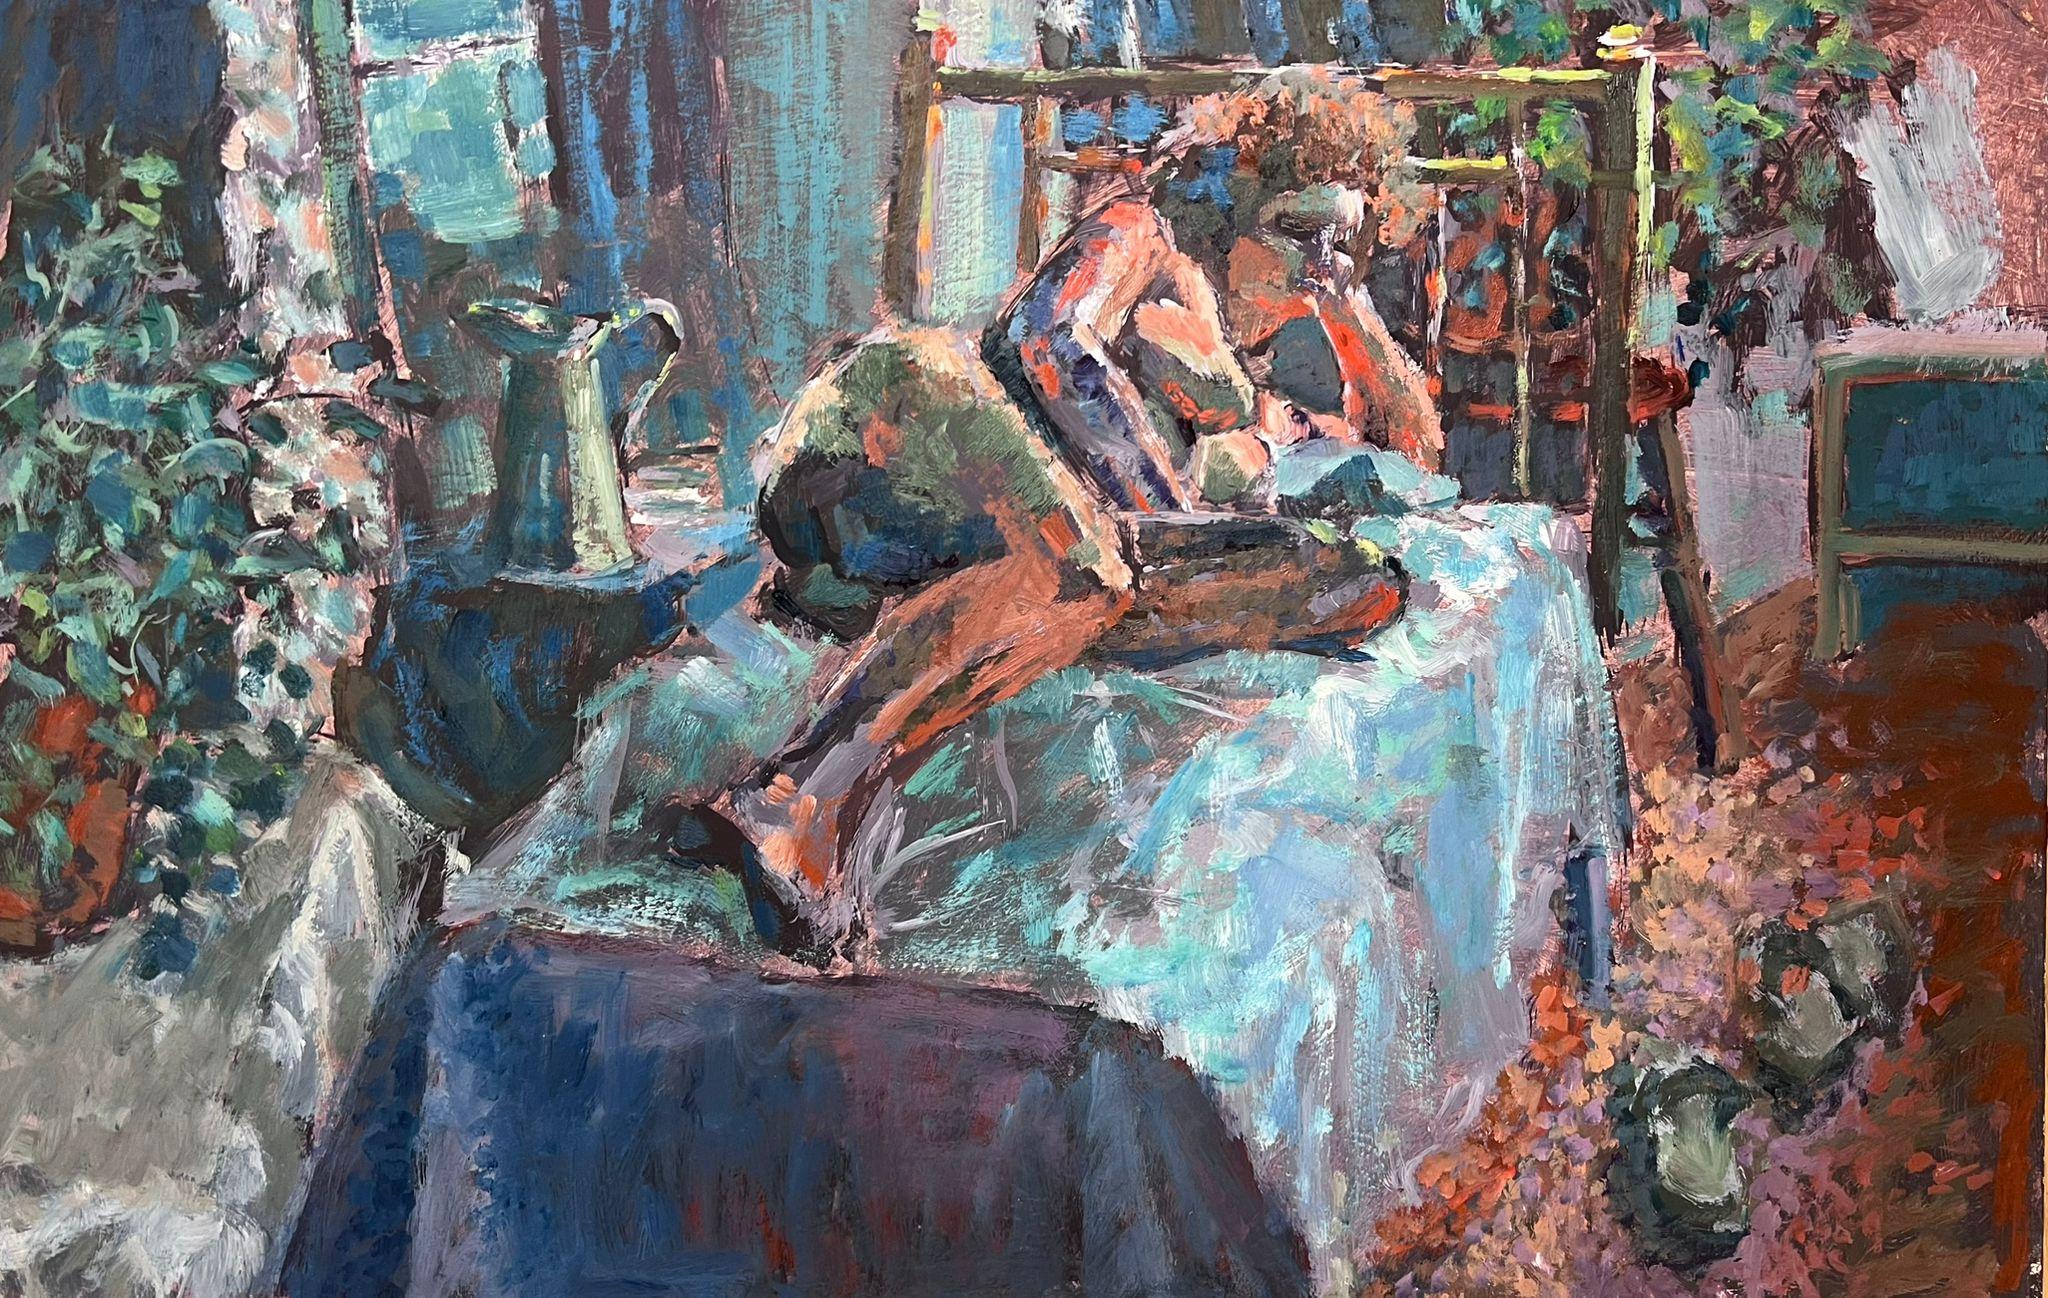 Nude Painting Helen Greenfield - English Impressionist Oil Painting Artists Nude Model Posed on Bed (peinture à l'huile impressionniste anglaise)